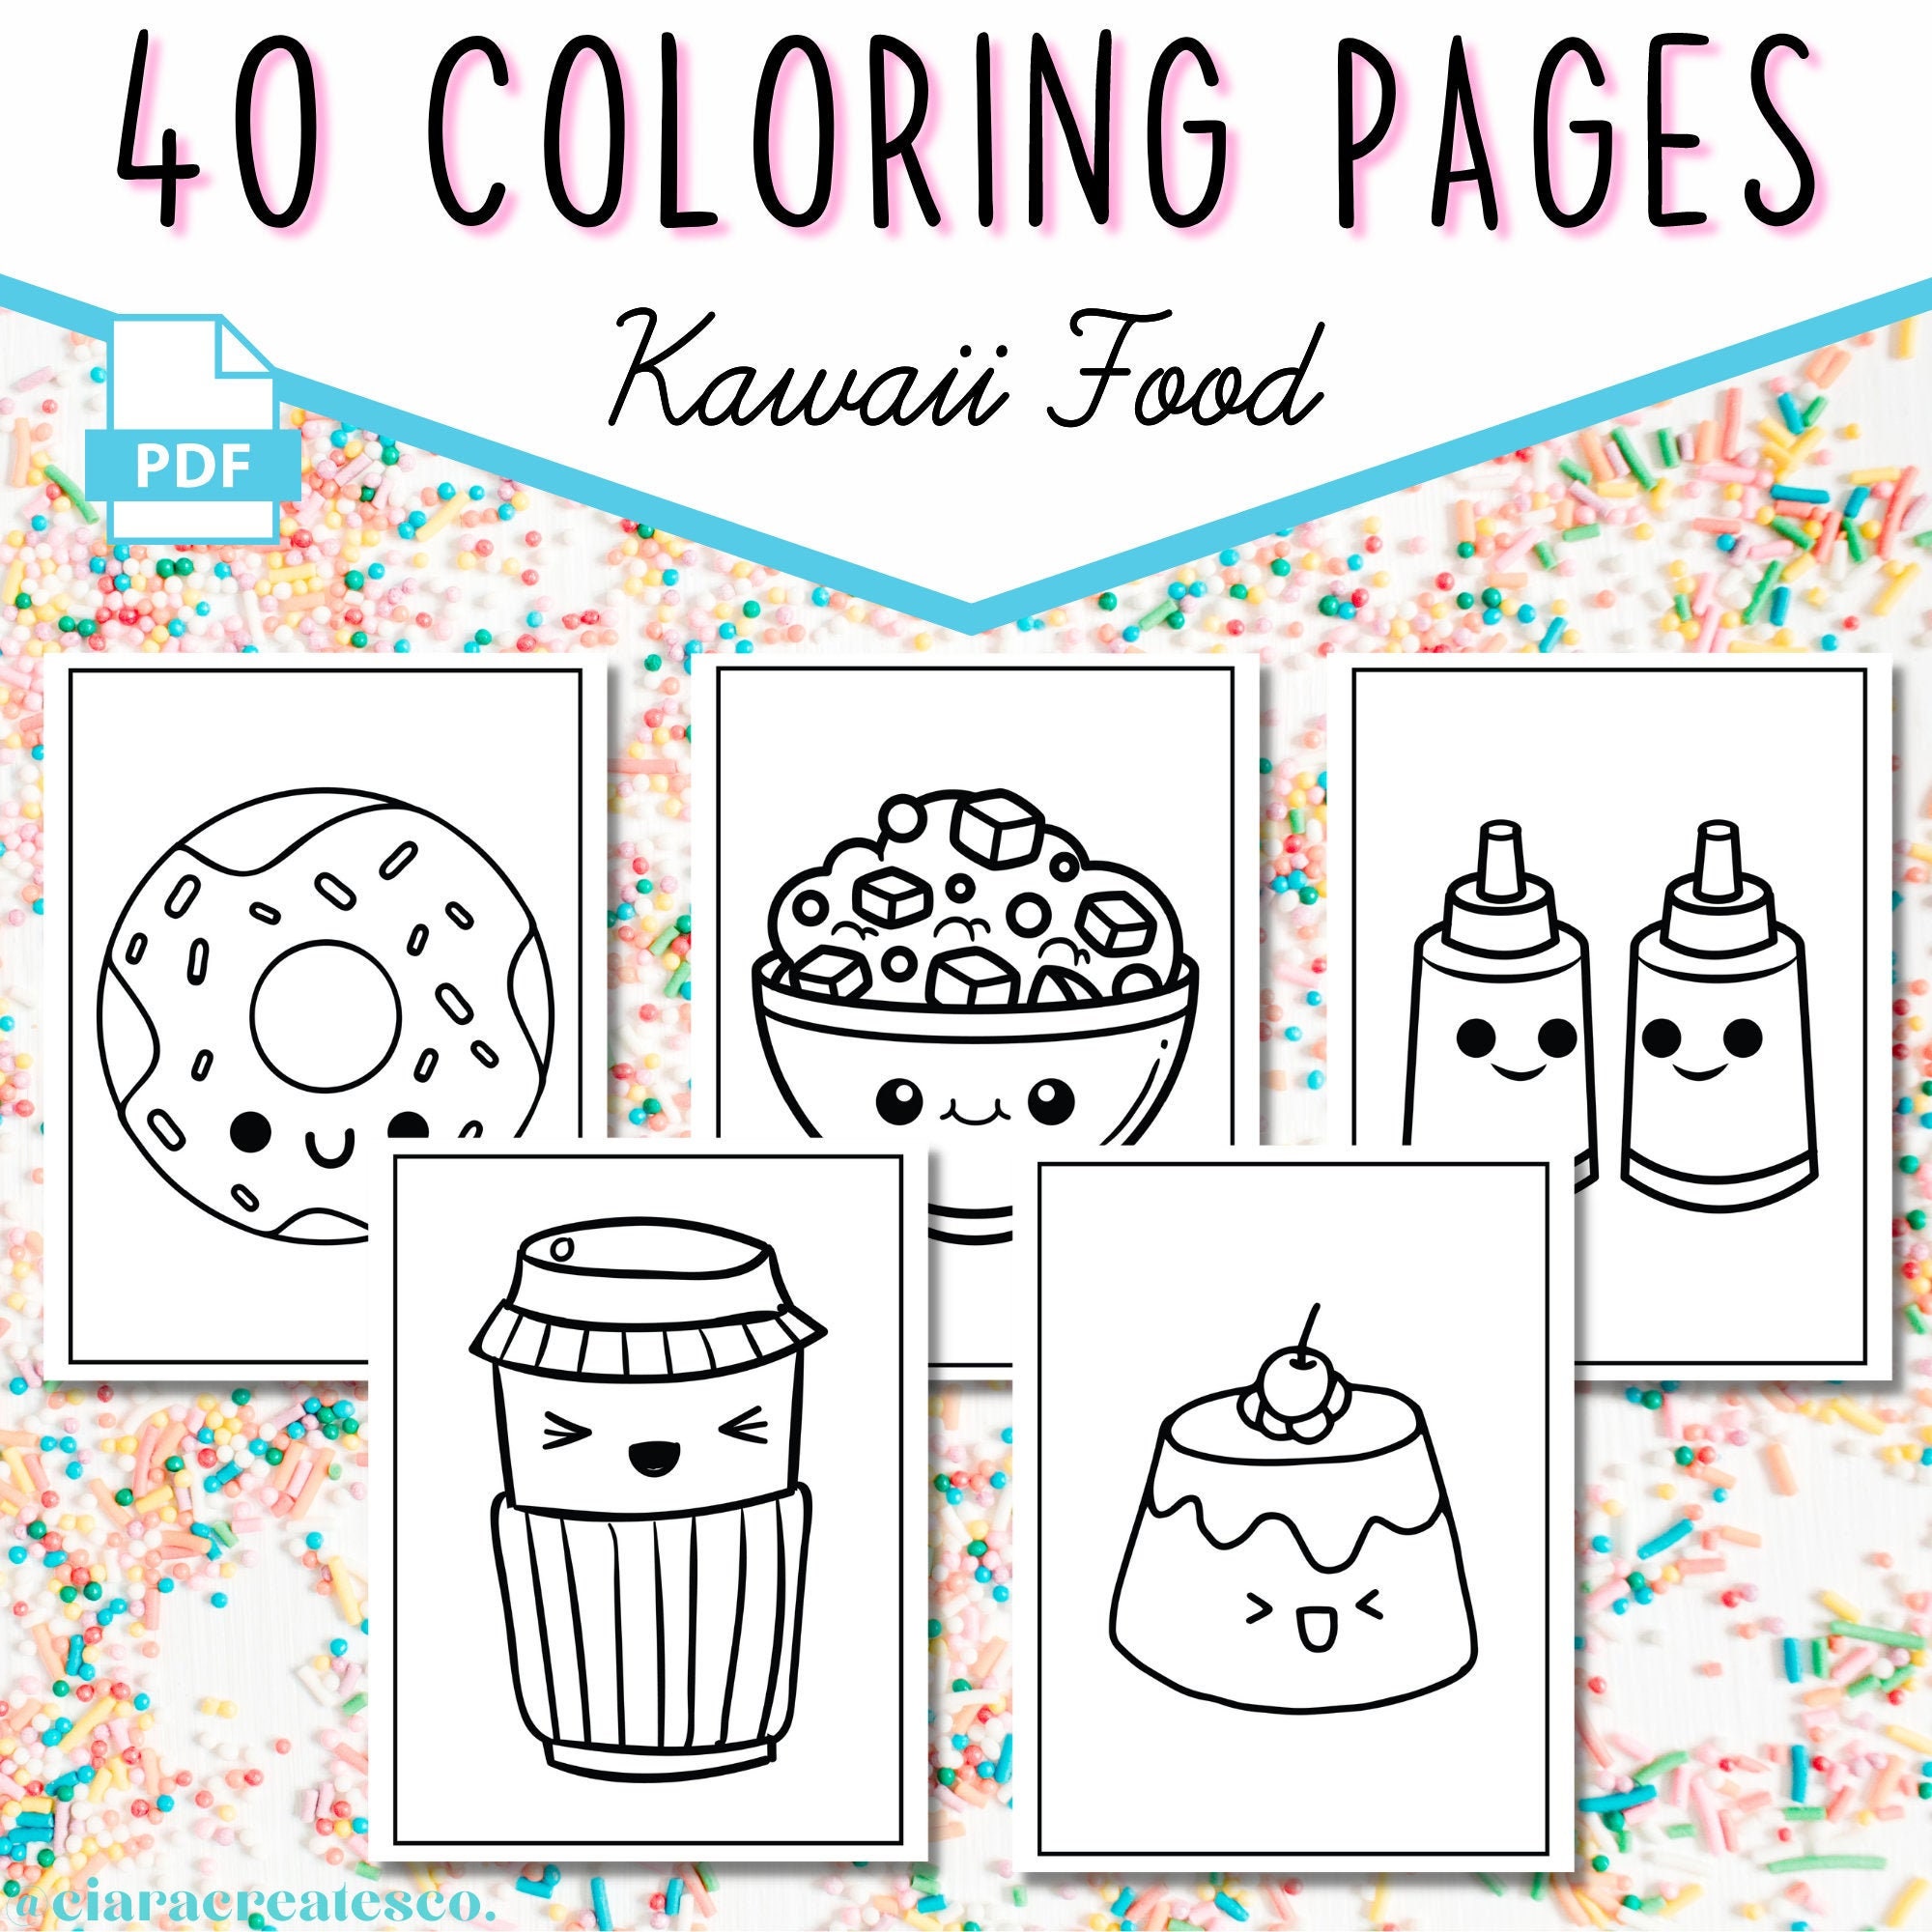 Cute food coloring pages food coloring pages for kids birthday party activity printable coloring book kawaii food coloring pages